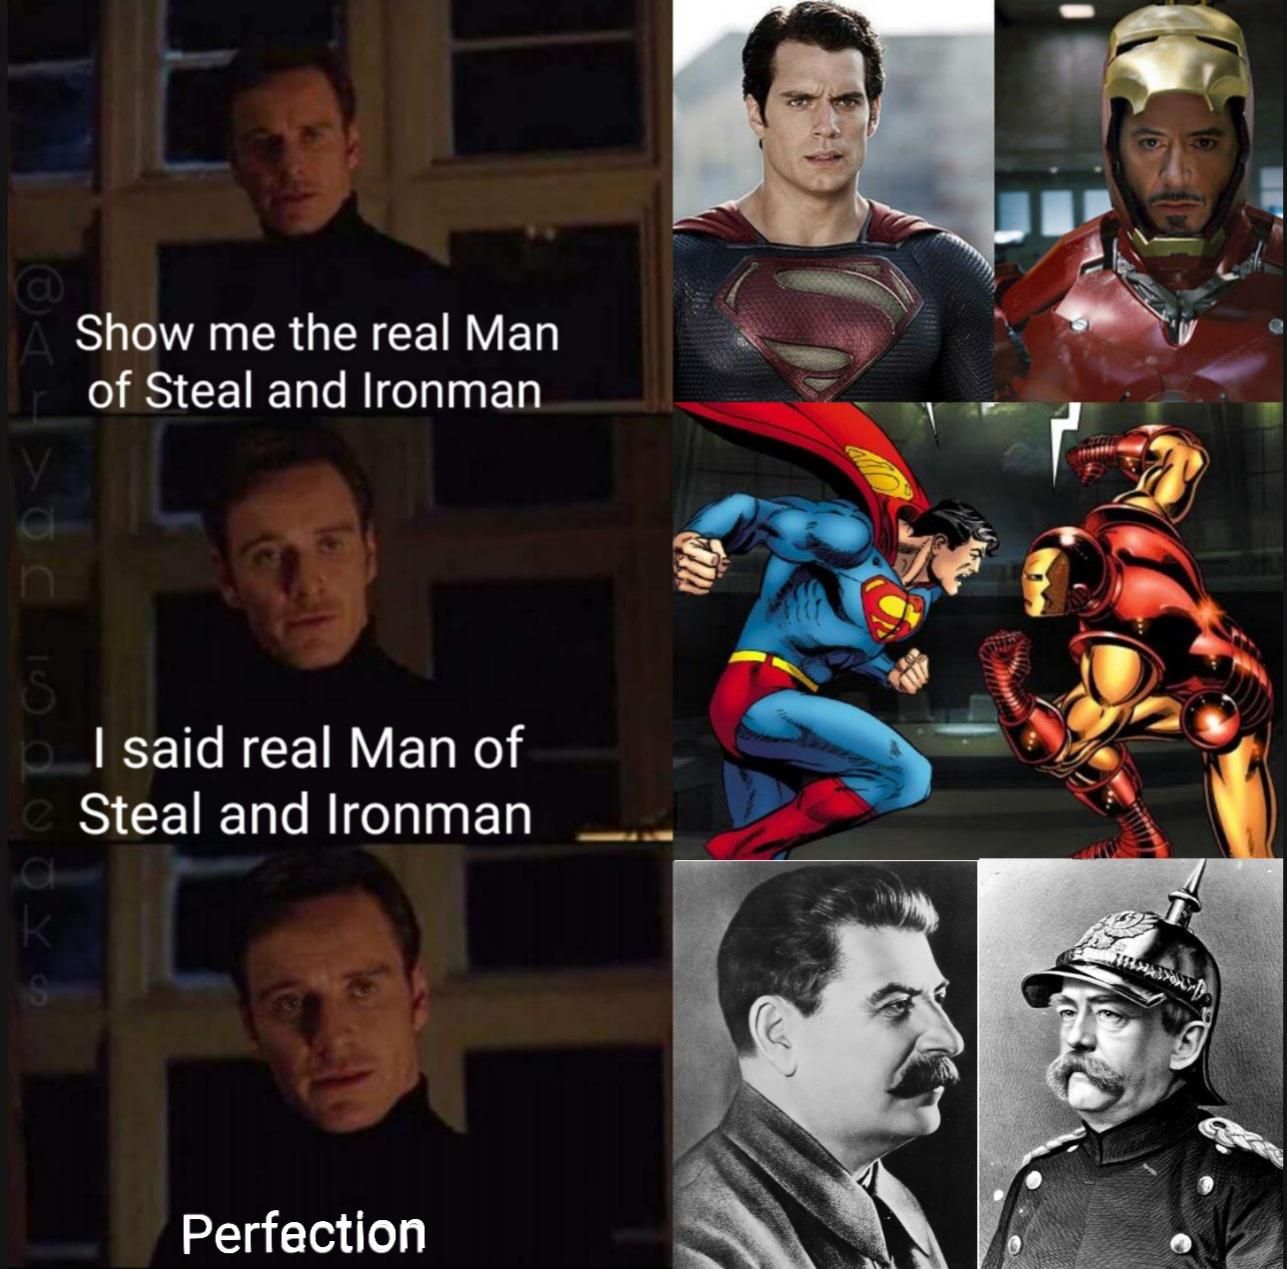 The Real Man of Steal and Ironman